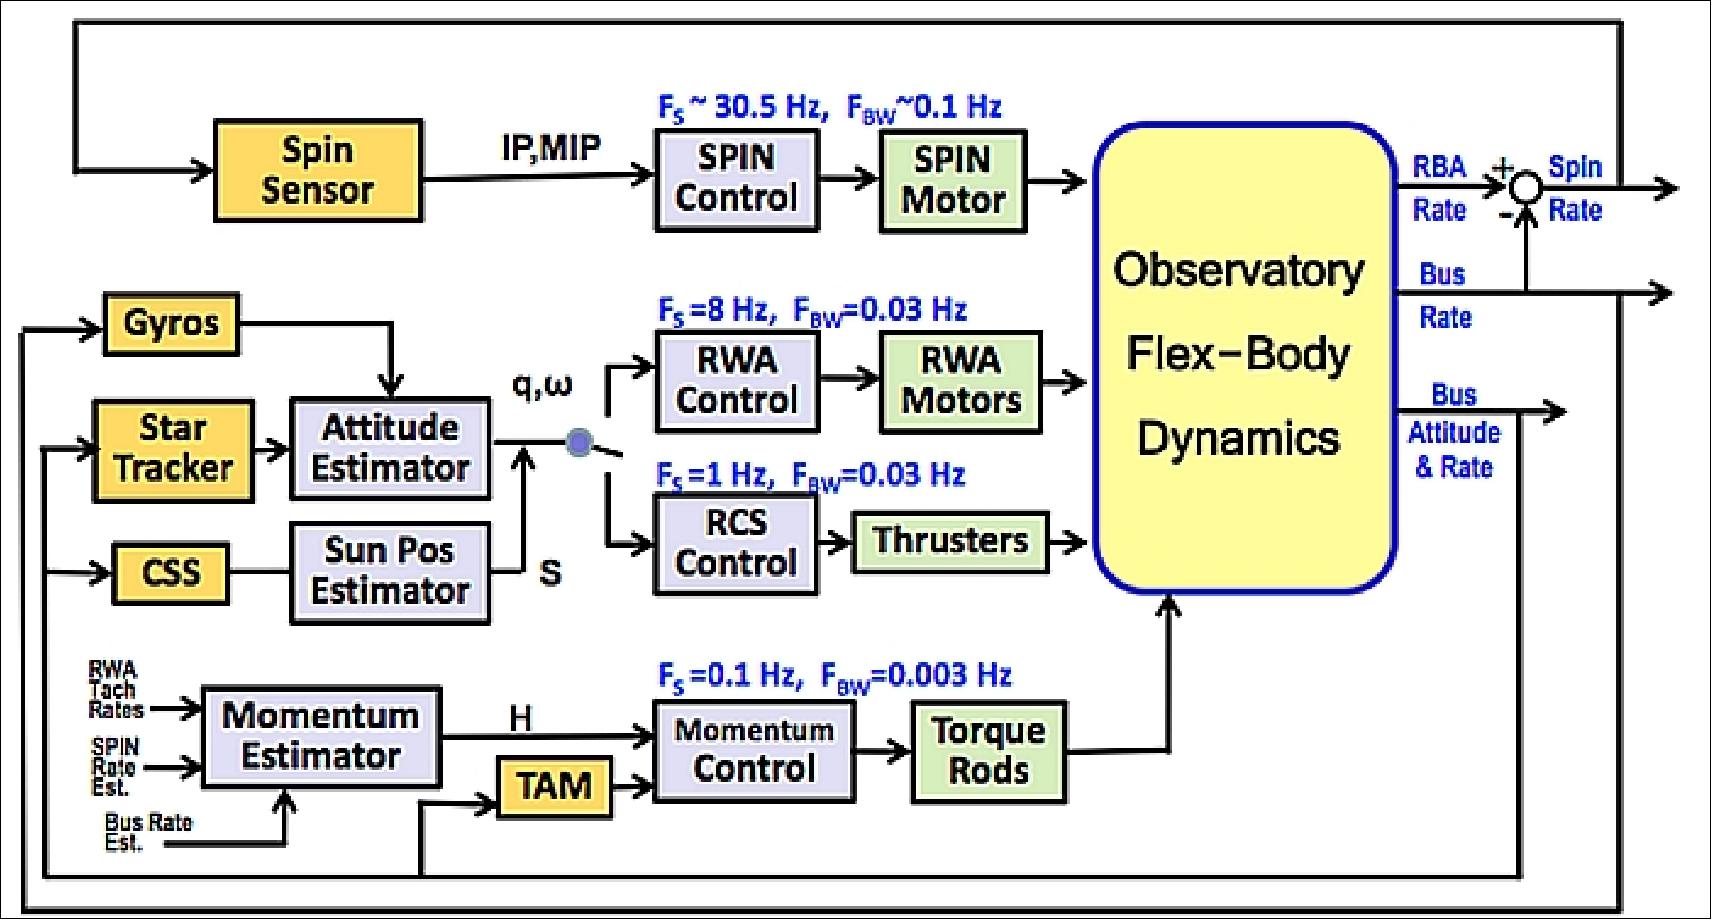 Figure 72: Pointing and control system architecture (image credit: NASA)